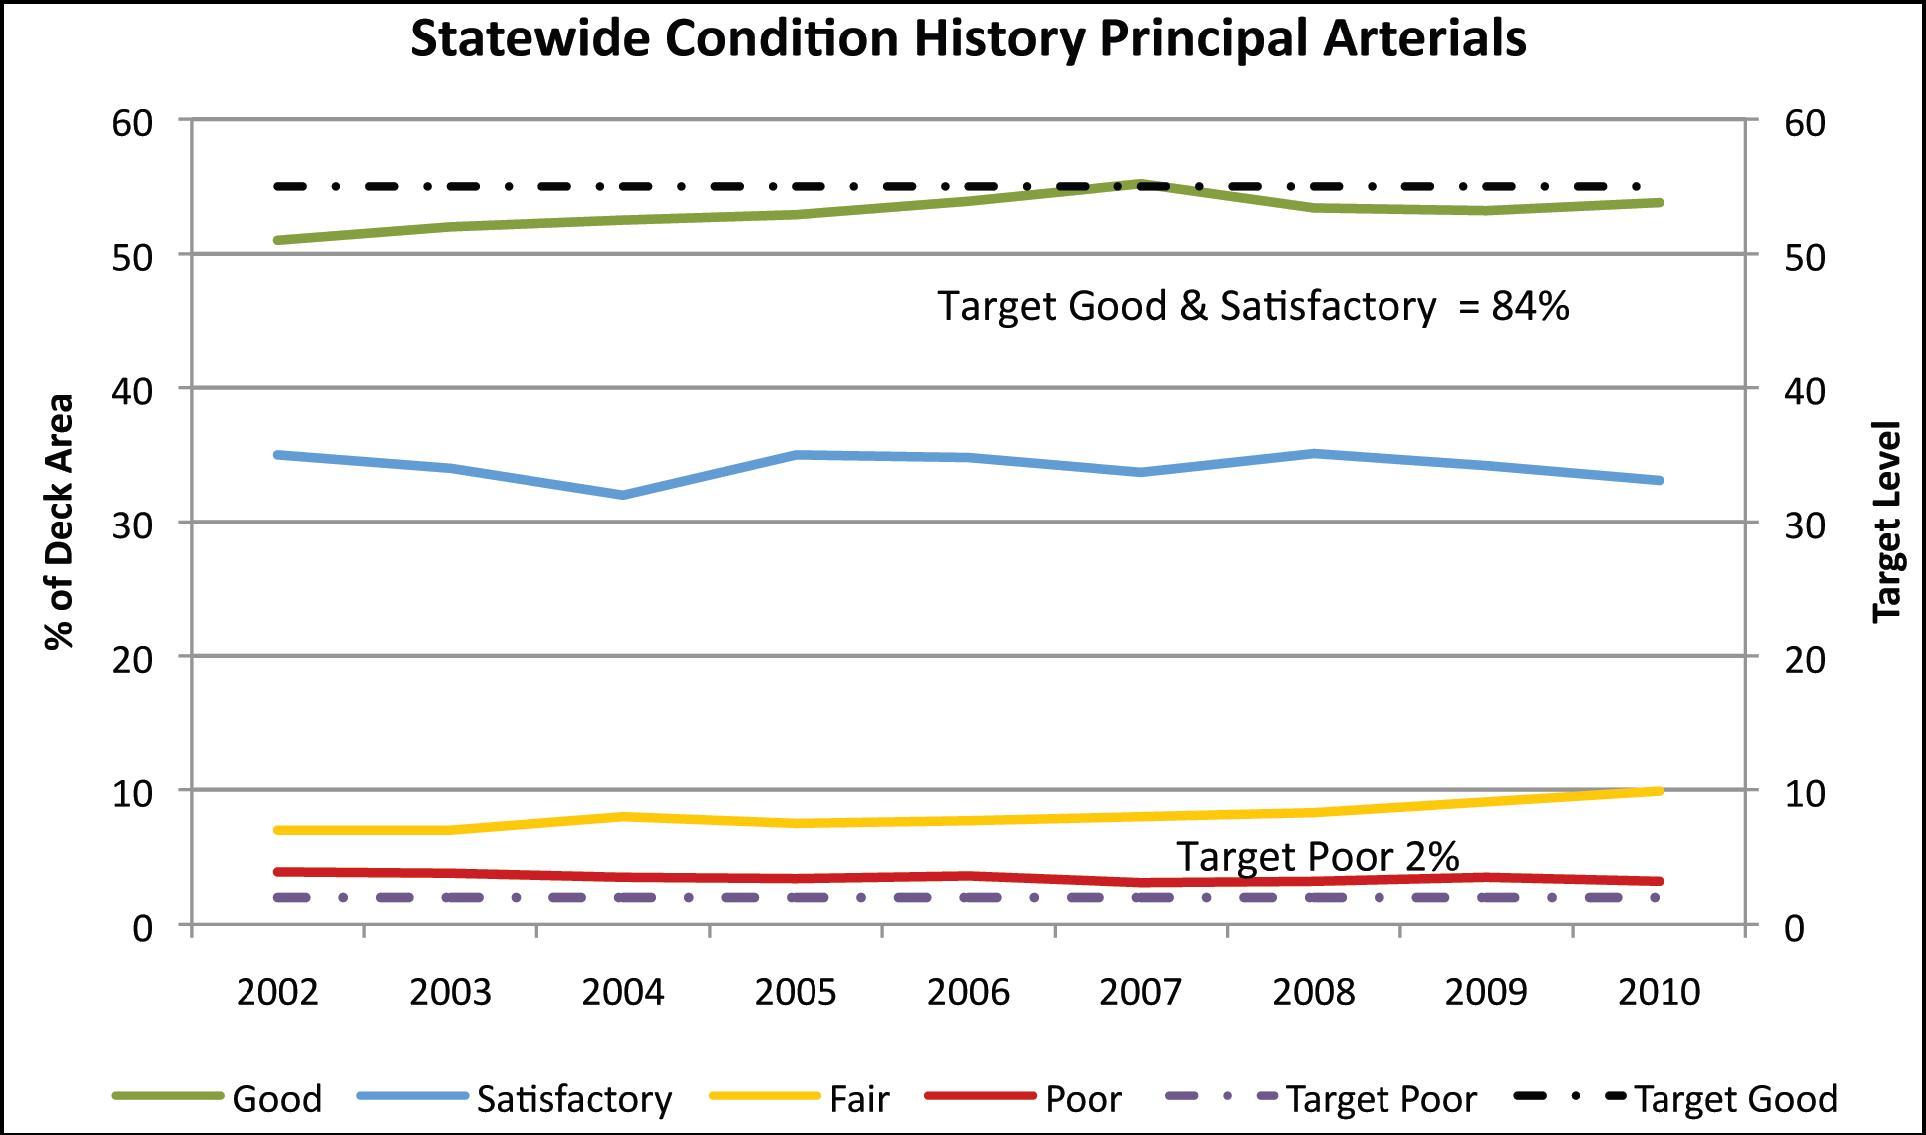 Figure 46 shows the trendlines for the percent of the deck area of bridges in Minnesota that are rated in the good, satisfactory, fair and poor condition.  The trendline for the bridges in good condtion rises from about 51 percent in 2002 to about 54 percent in 2010.  The percent of bridges in the satisfactory condition varies but stays about 35 percent throughout the period. The number of bridges in fair condition increase from about 8 percent to 10 percent during that period. The number of bridges in the poor condition remains low with about three percent of the bridges in poor condition beween 2002 and 2010.